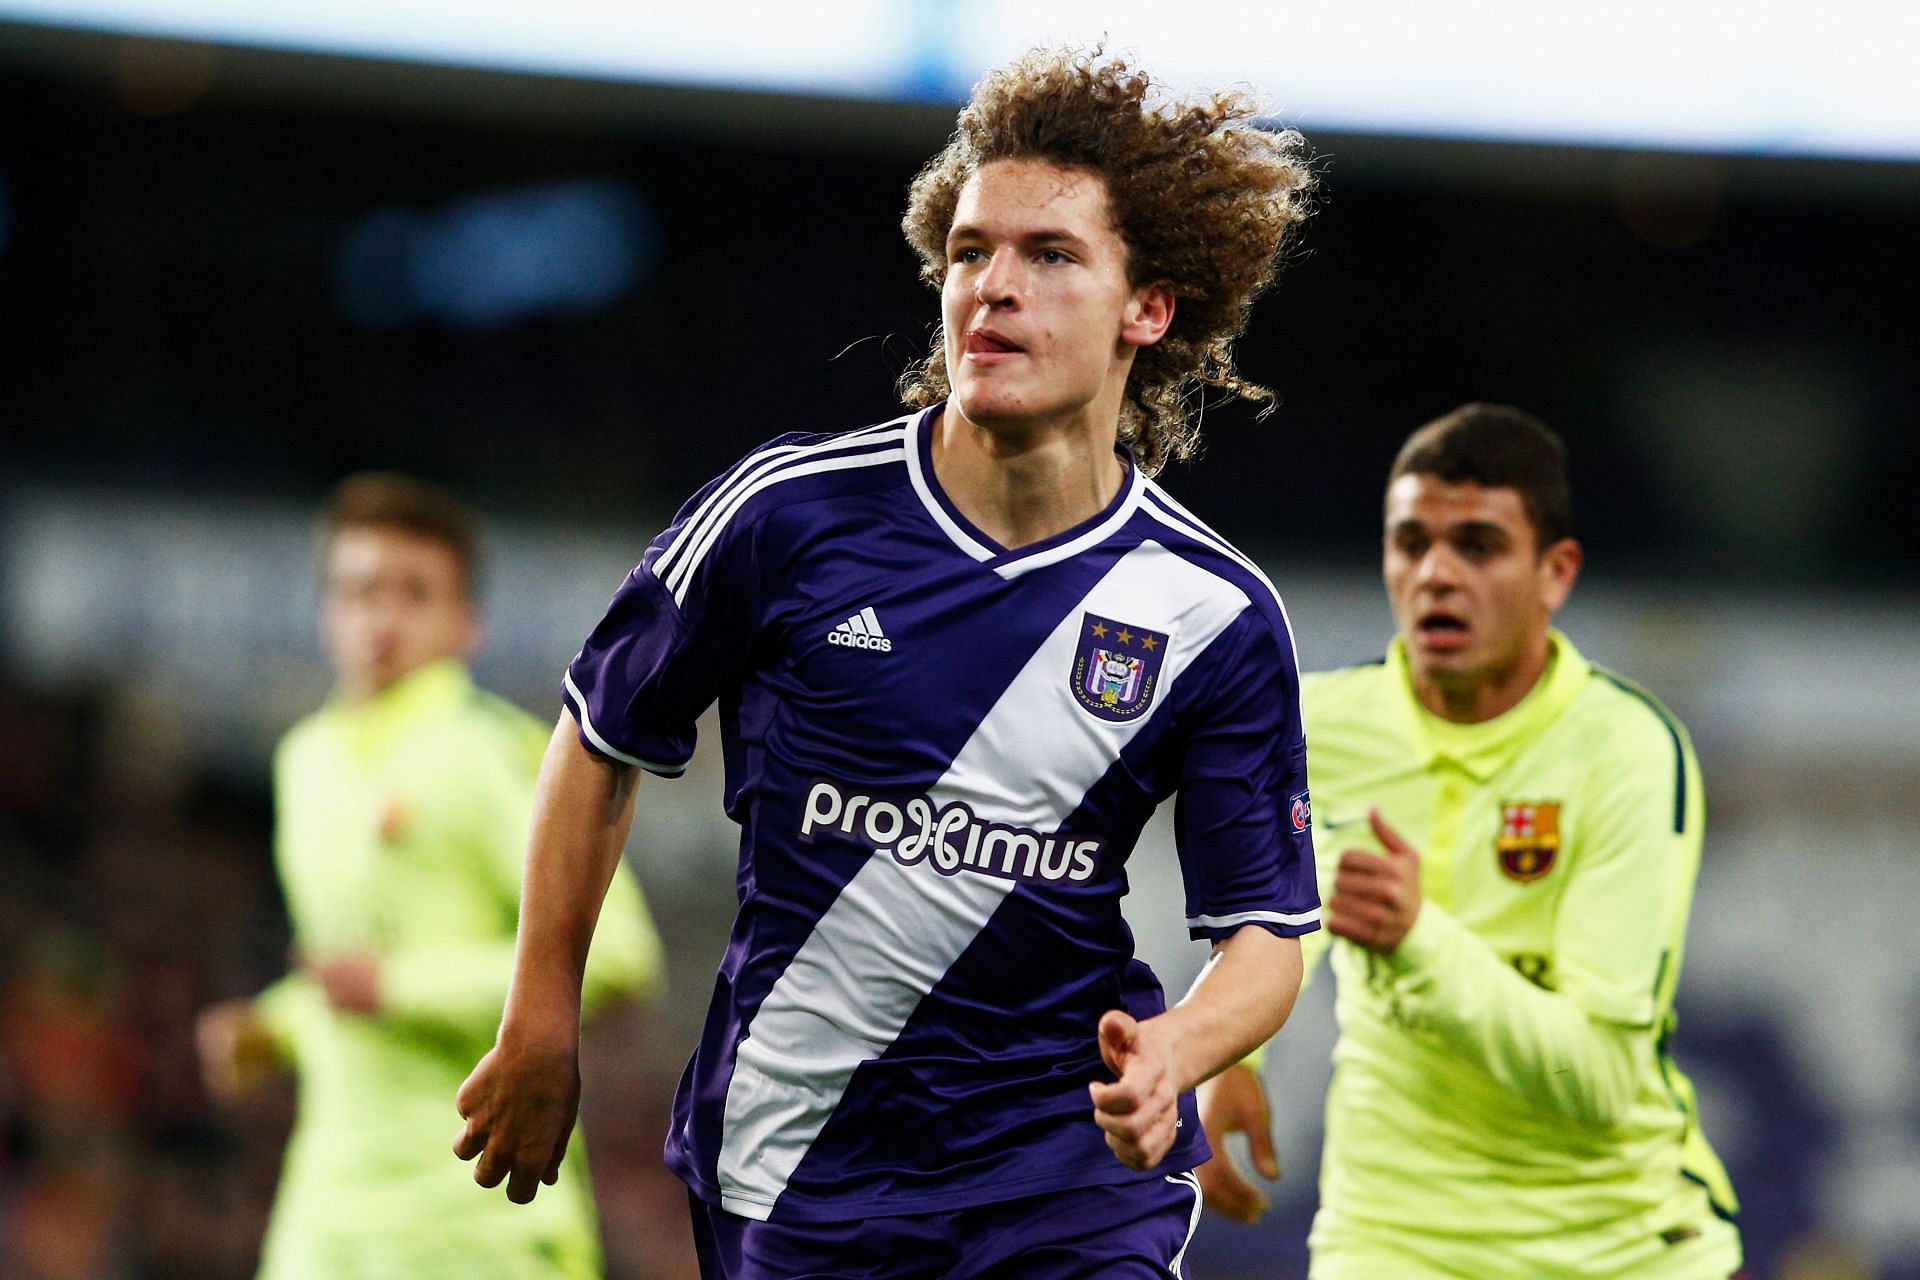 Faes was impressive at Anderlecht and has contunued his form at Stade-Reims